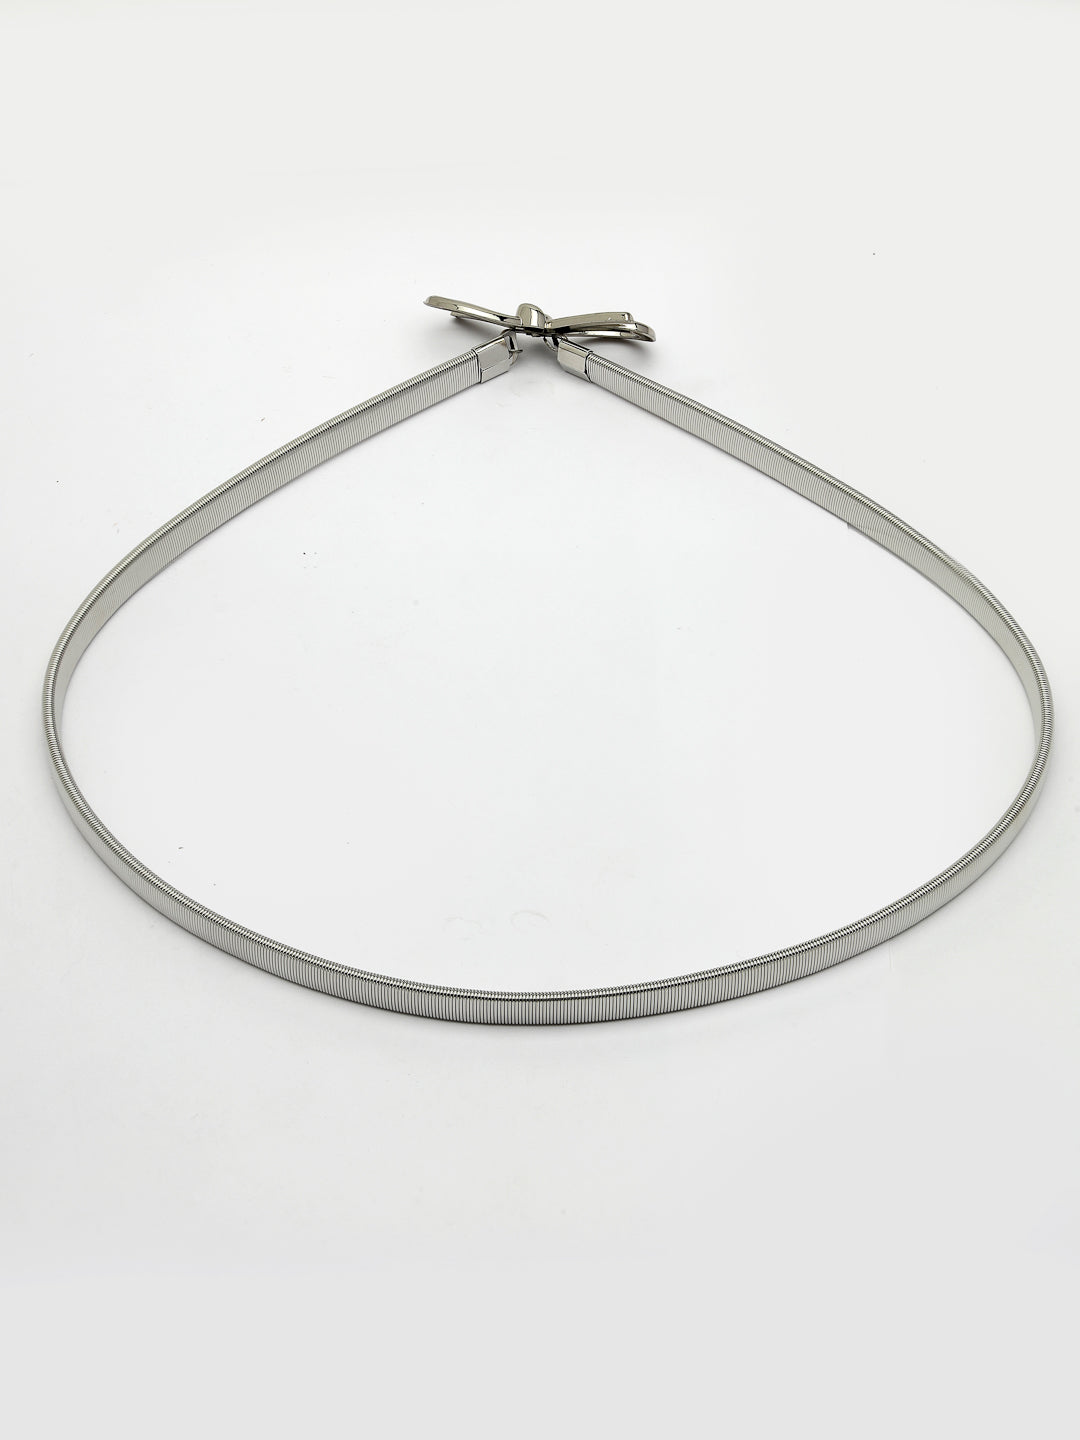 Women's circular silver plated stretchable metal belt - NVR